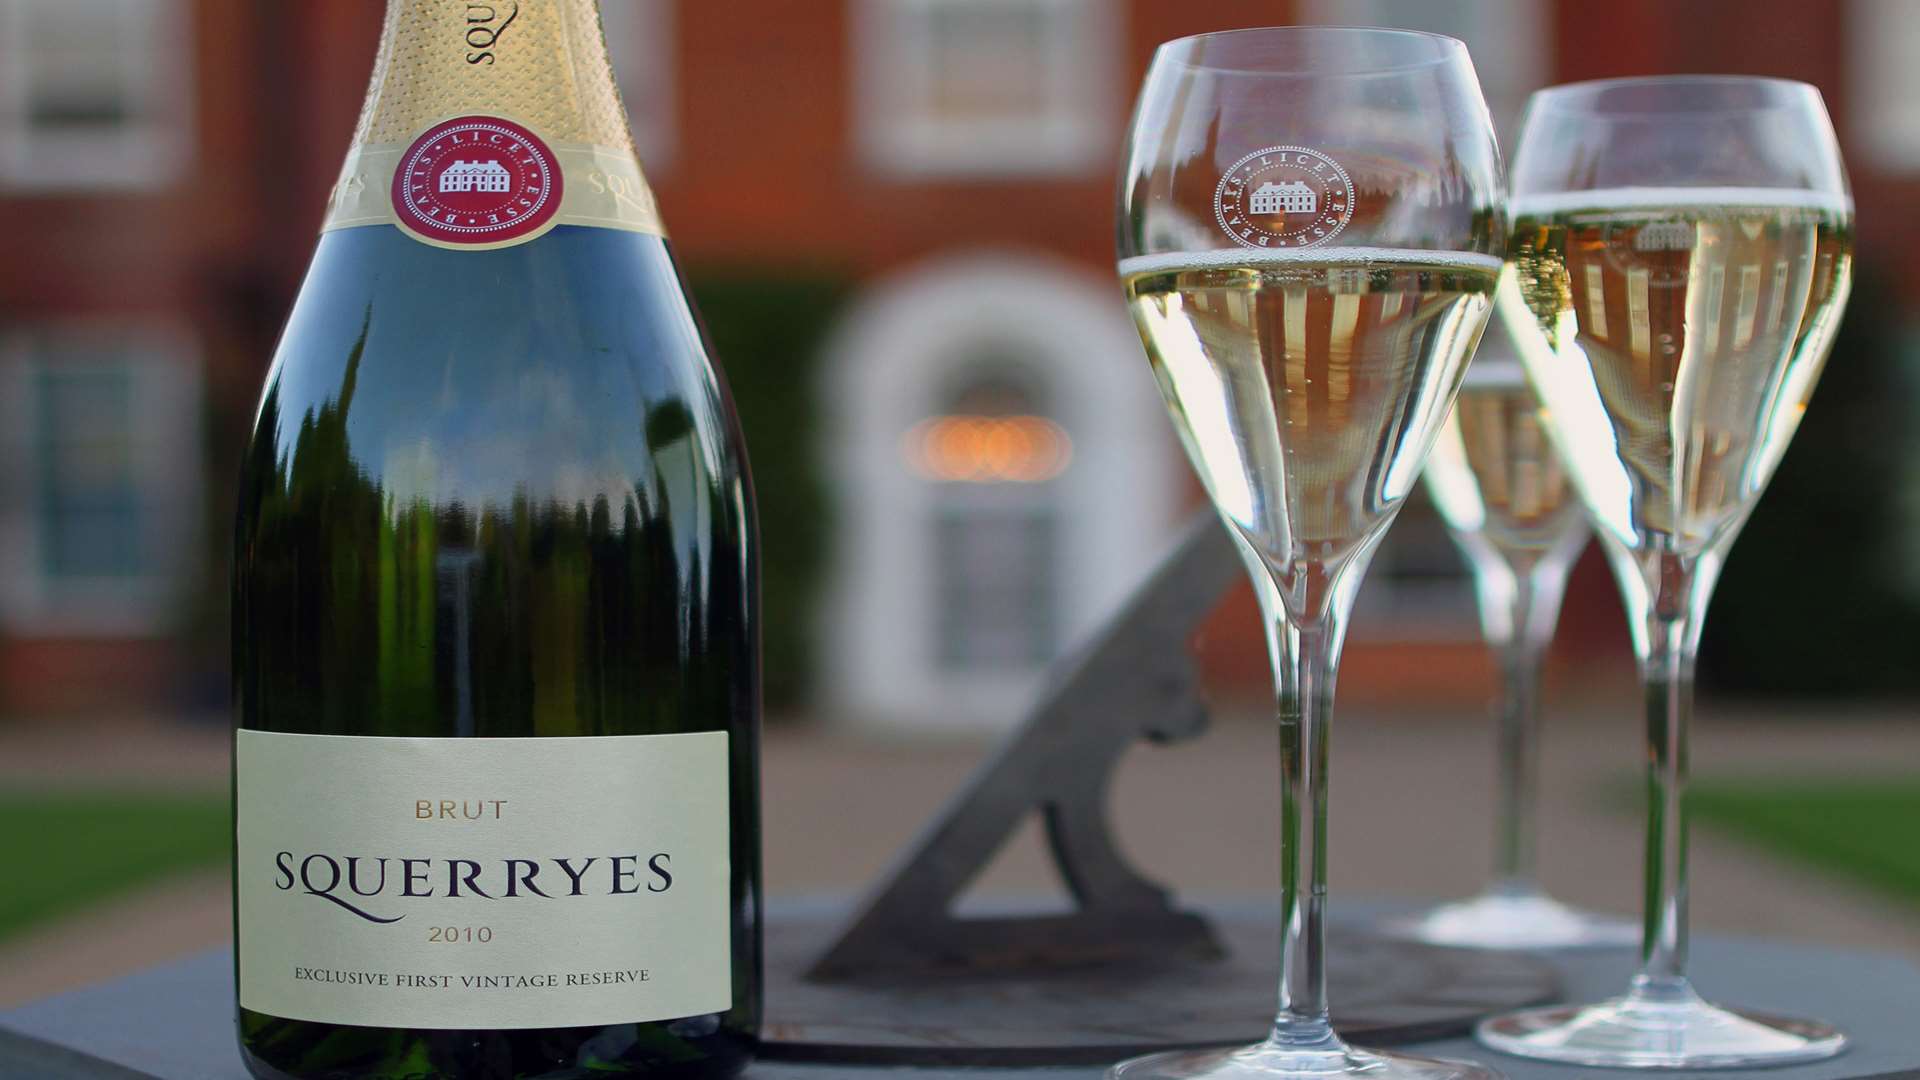 Guests will be greeted with a glass of Squerryes wine @HarperPhoto